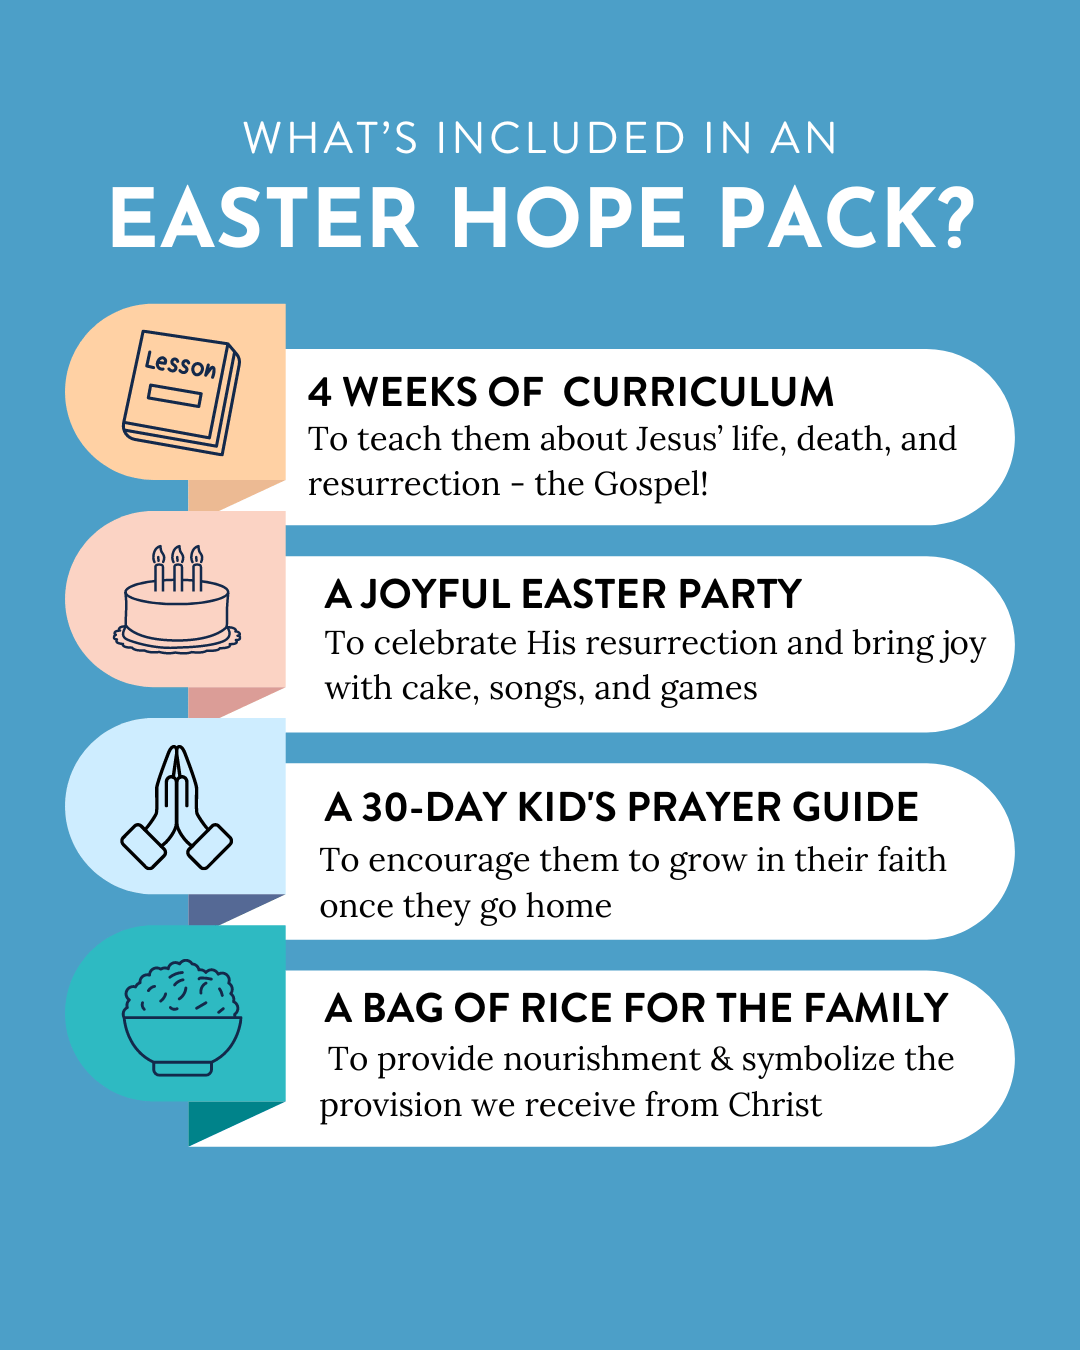 What's in an Easter Hope Pack?